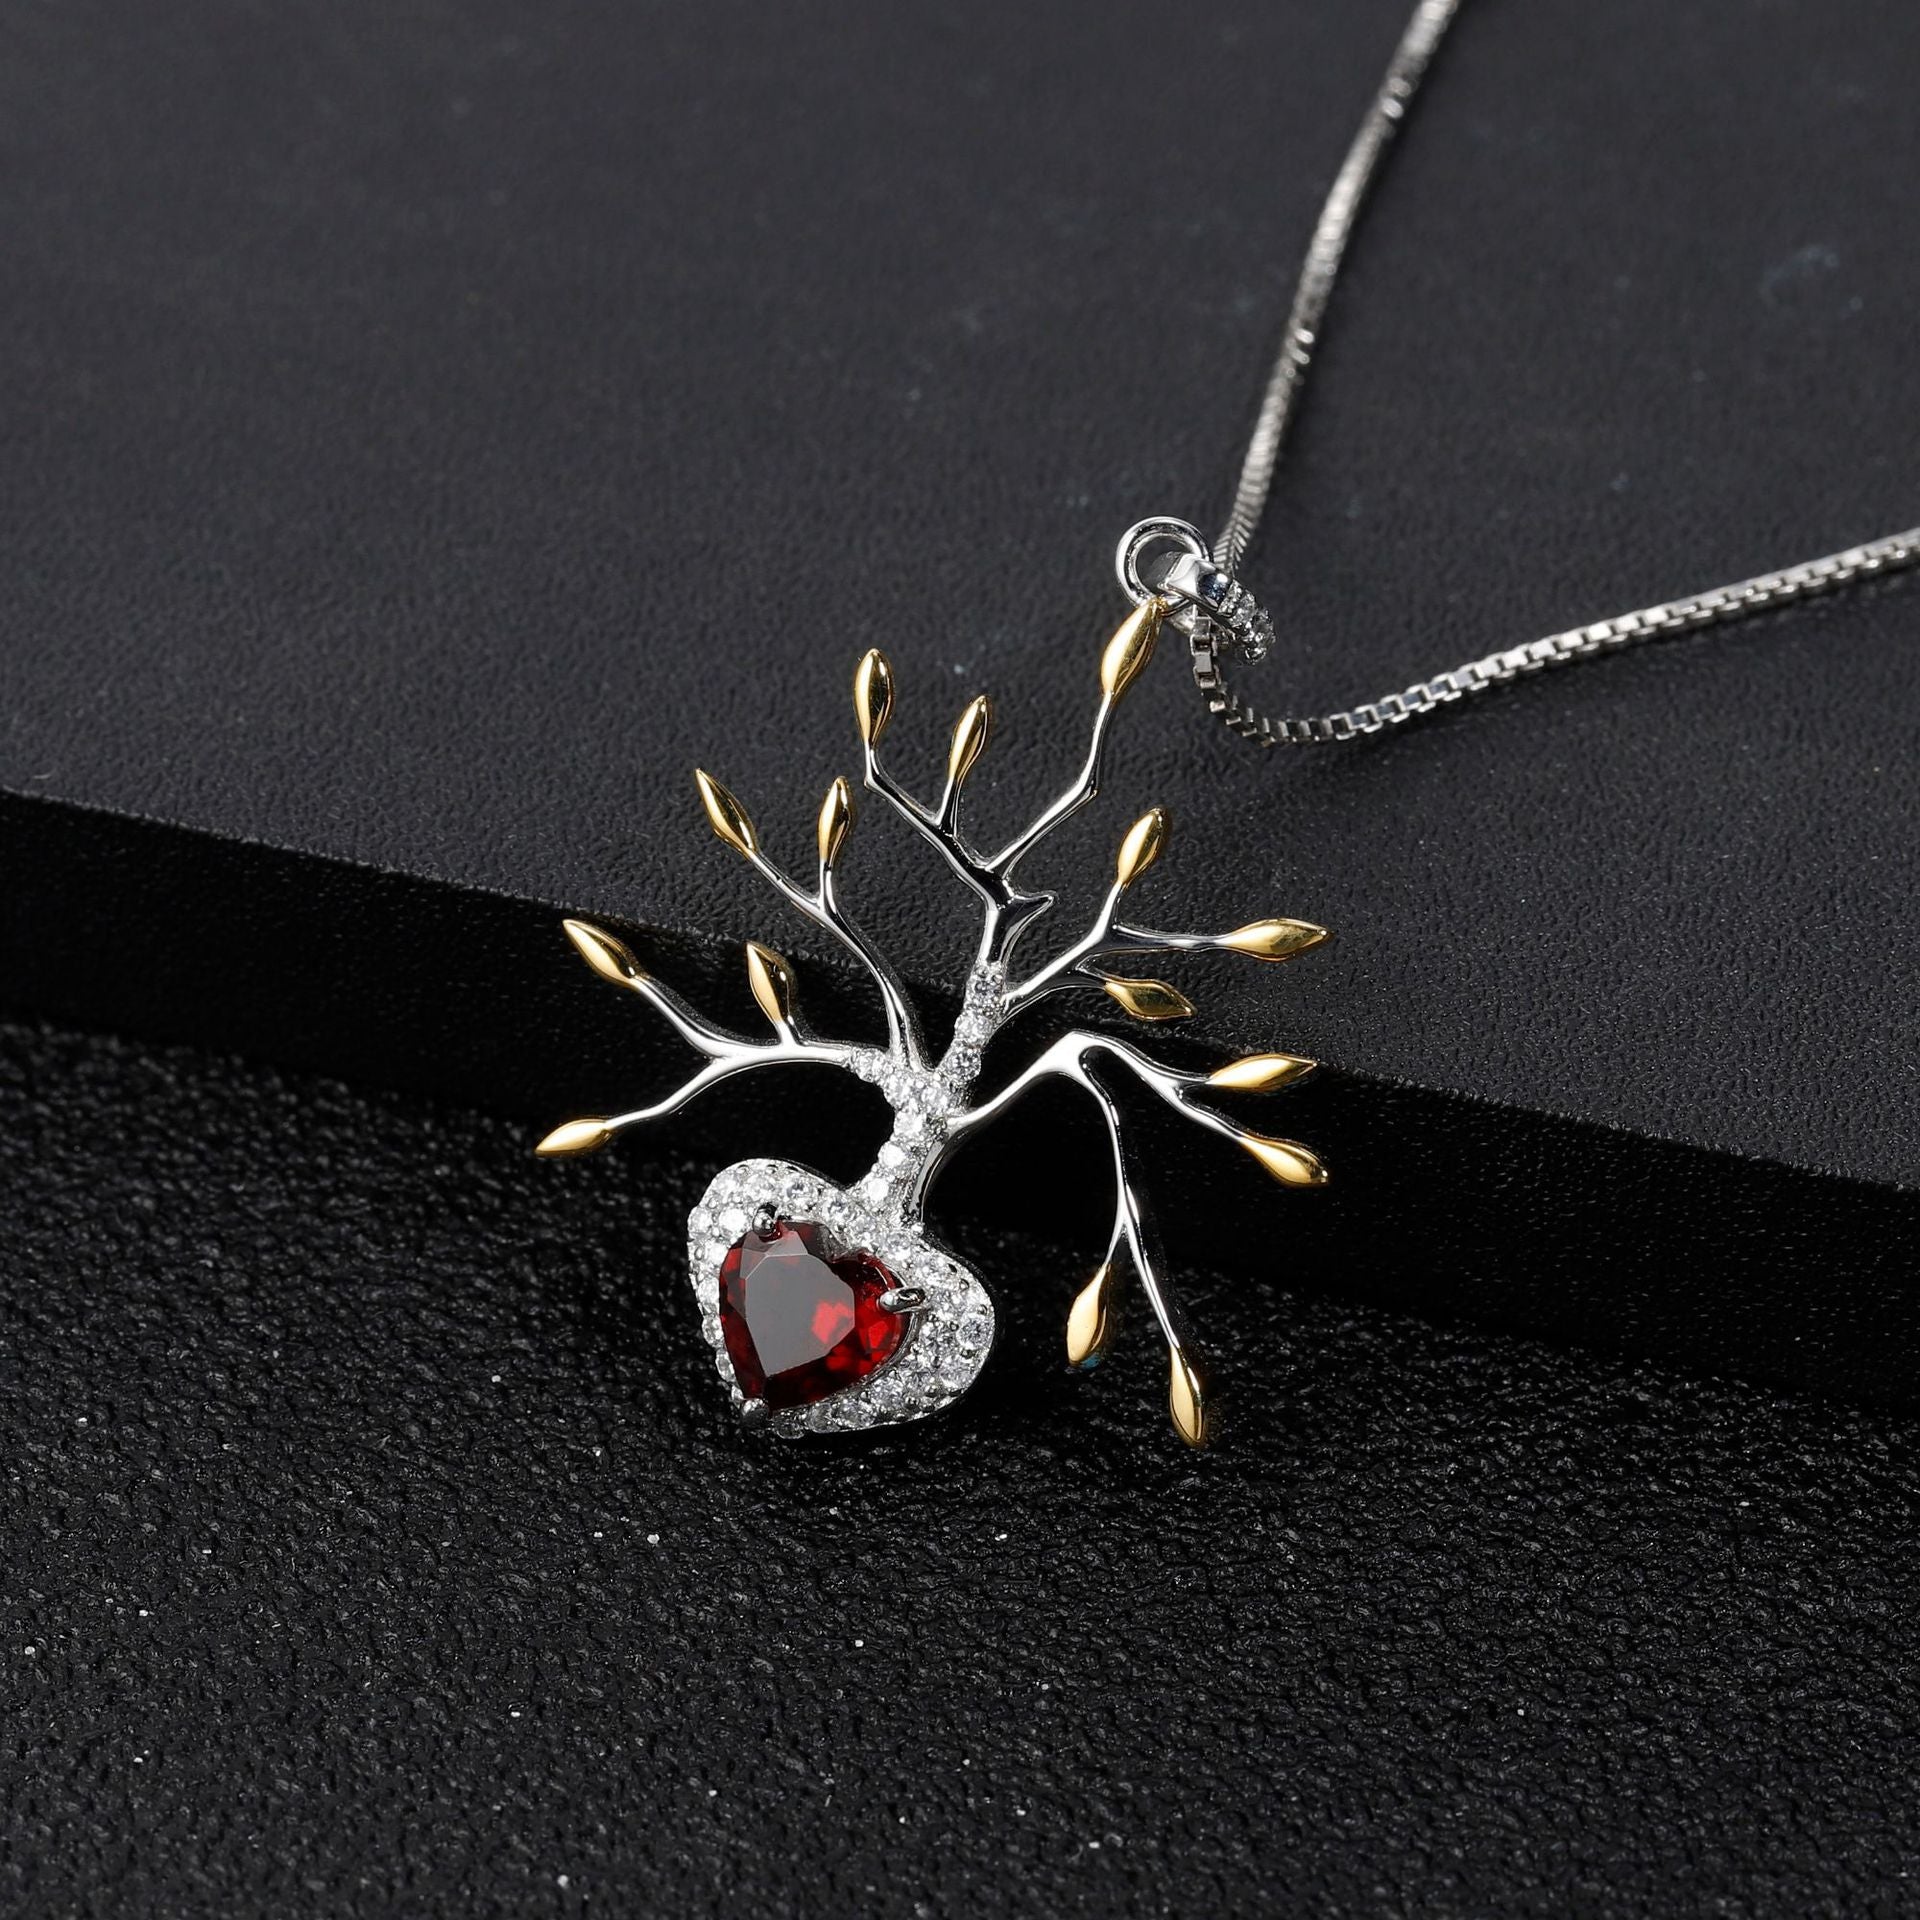 Premium Design Natural Colourful Gemstone Life Tree Pendant Silver Necklace for Women